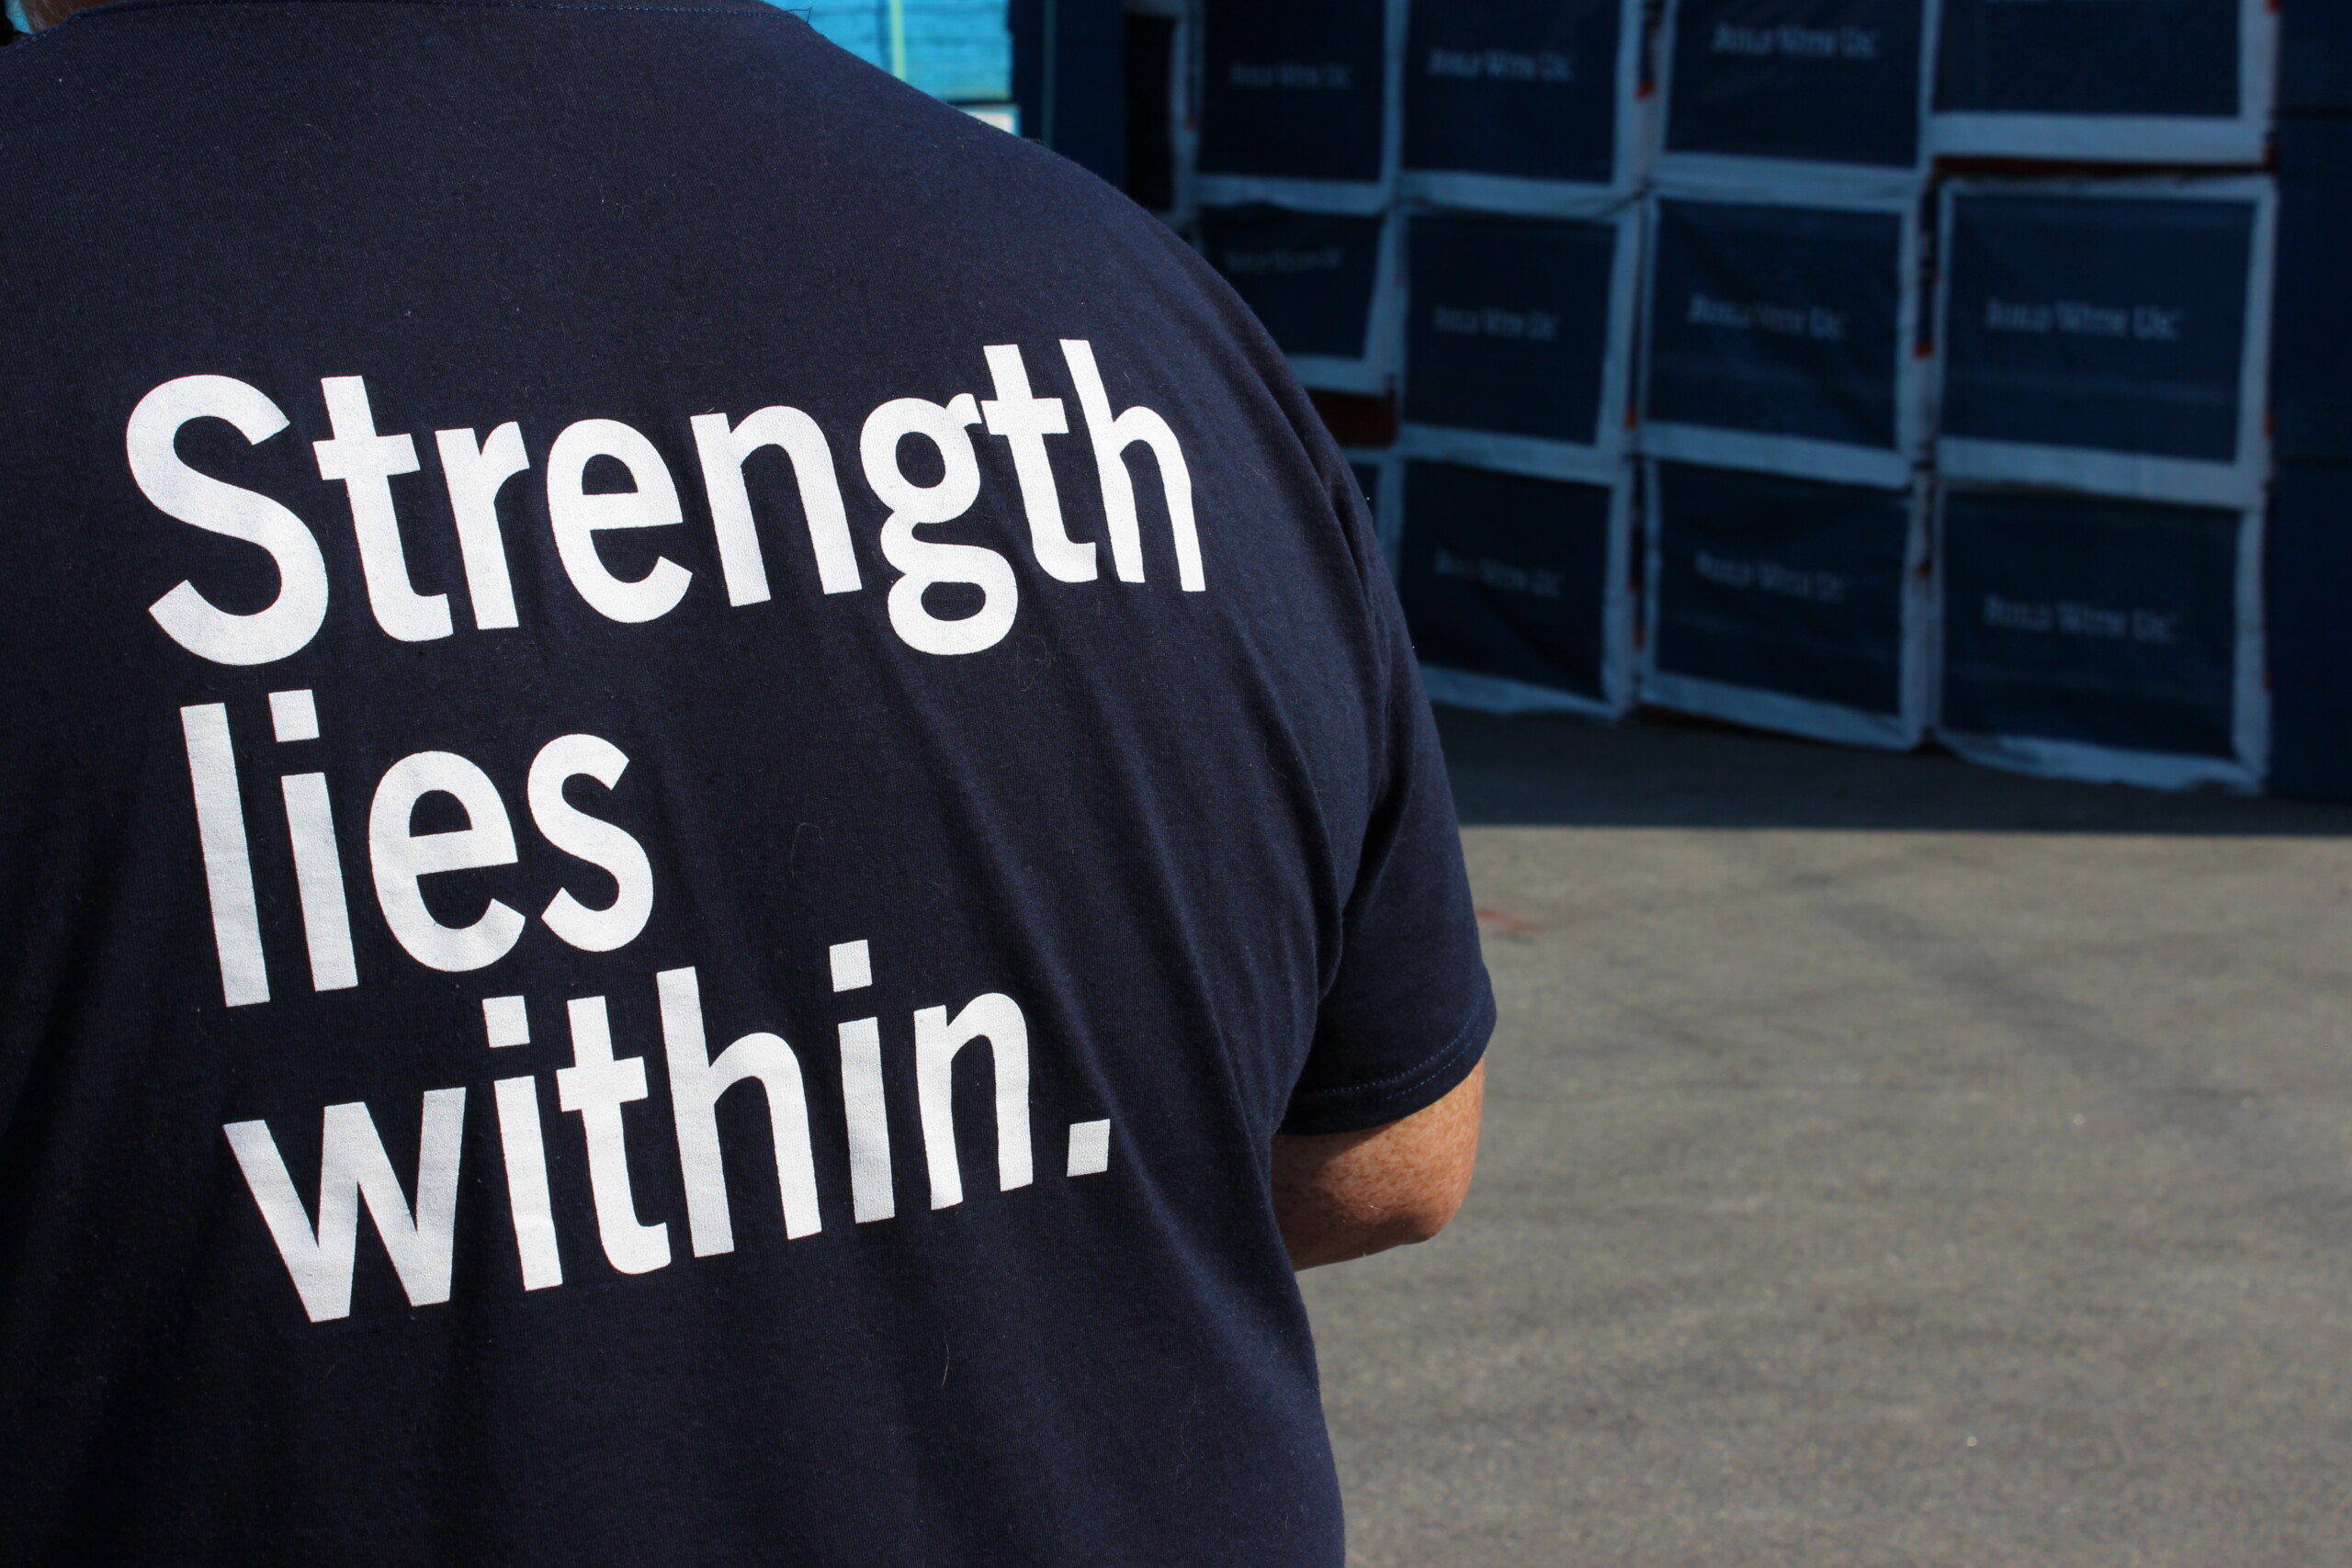 A person wearing a blue shirt with “Strength lies within.” written on the back is facing away from the camera.